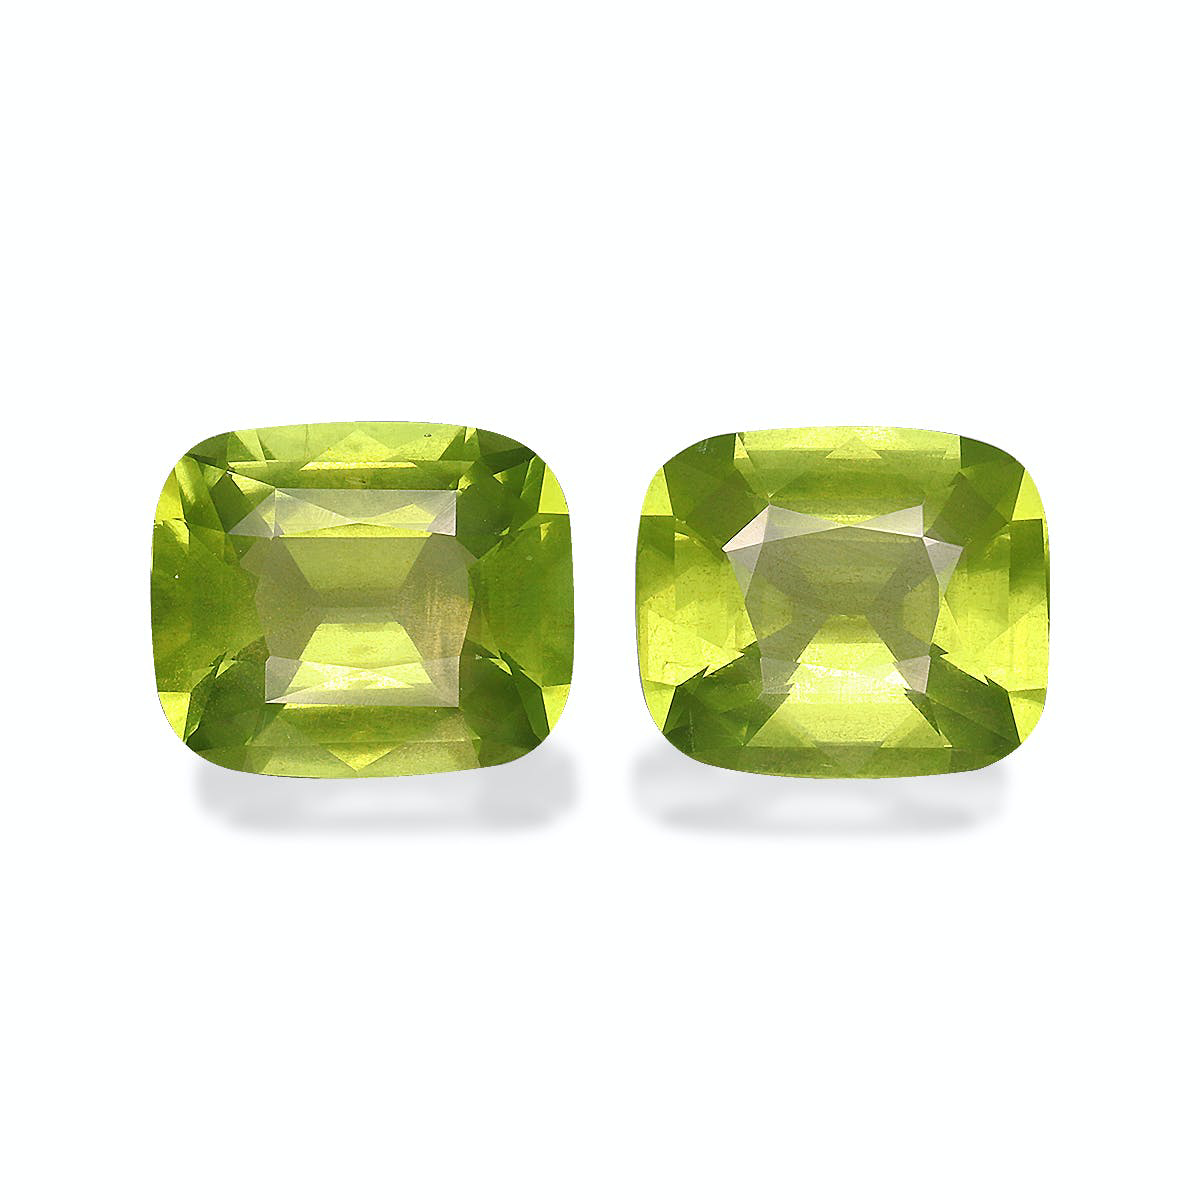 Picture of Lime Green Peridot 7.57ct - Pair (PD0119)